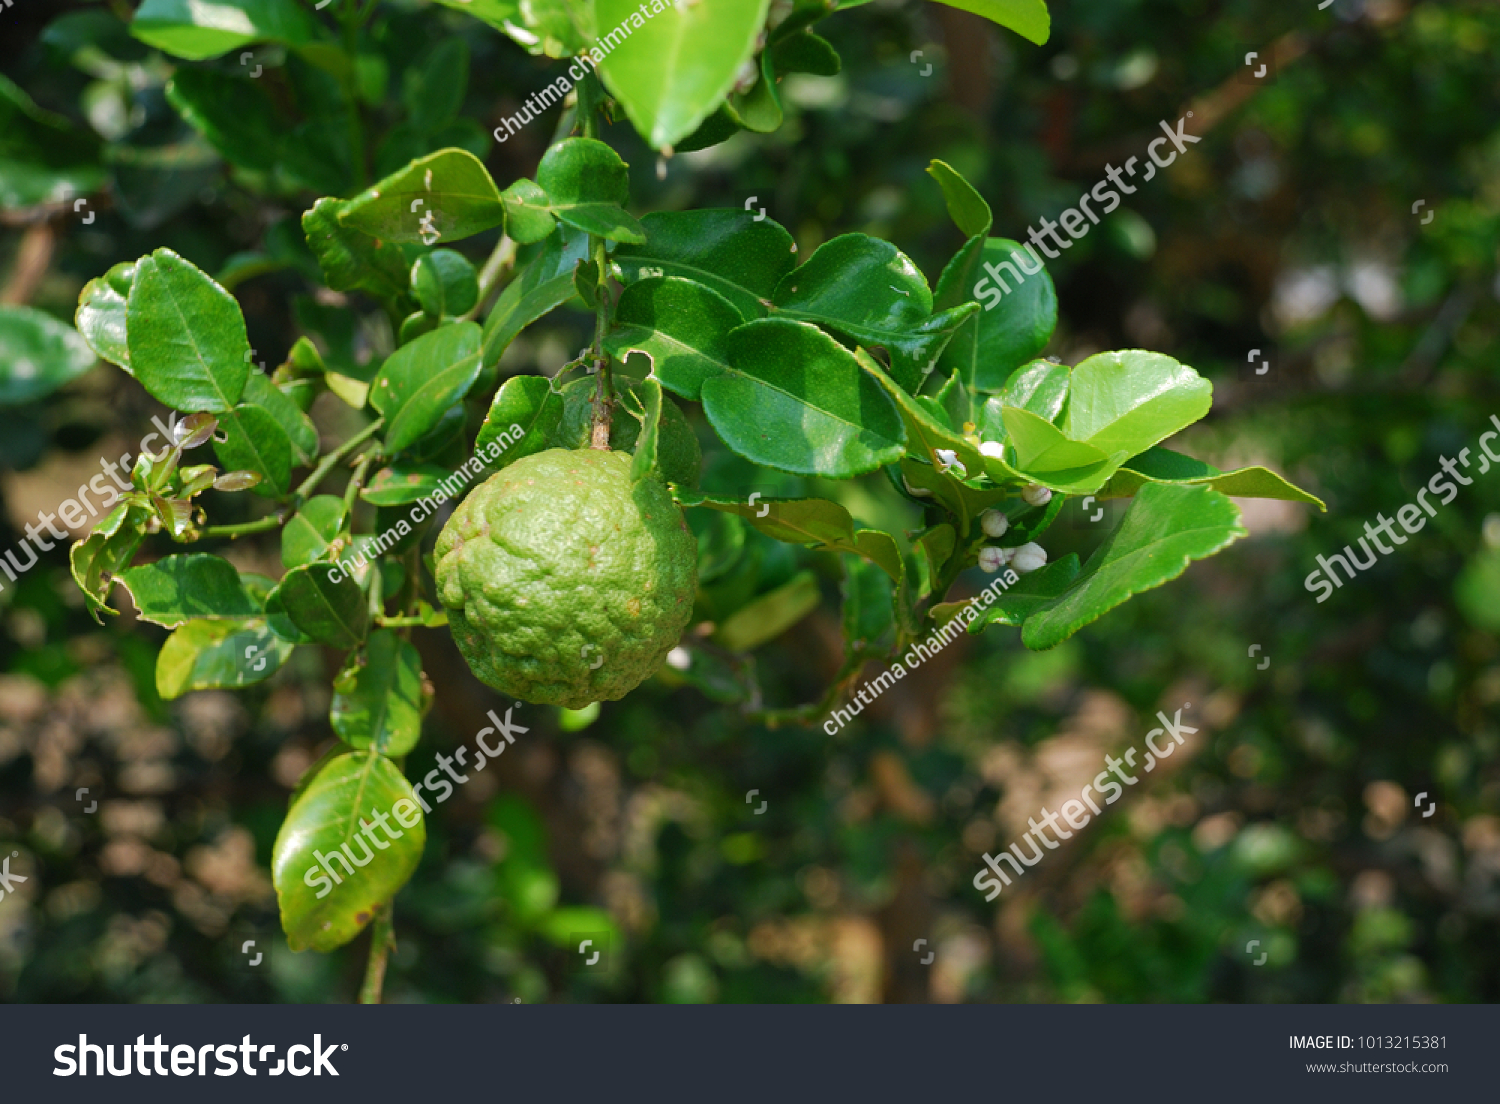 Citrus hystrix  Small tree Brown bark with spines pointed to the branches of the petiole leaves with a single leaf, white flowers, green flowers are blossoming and soft. #1013215381